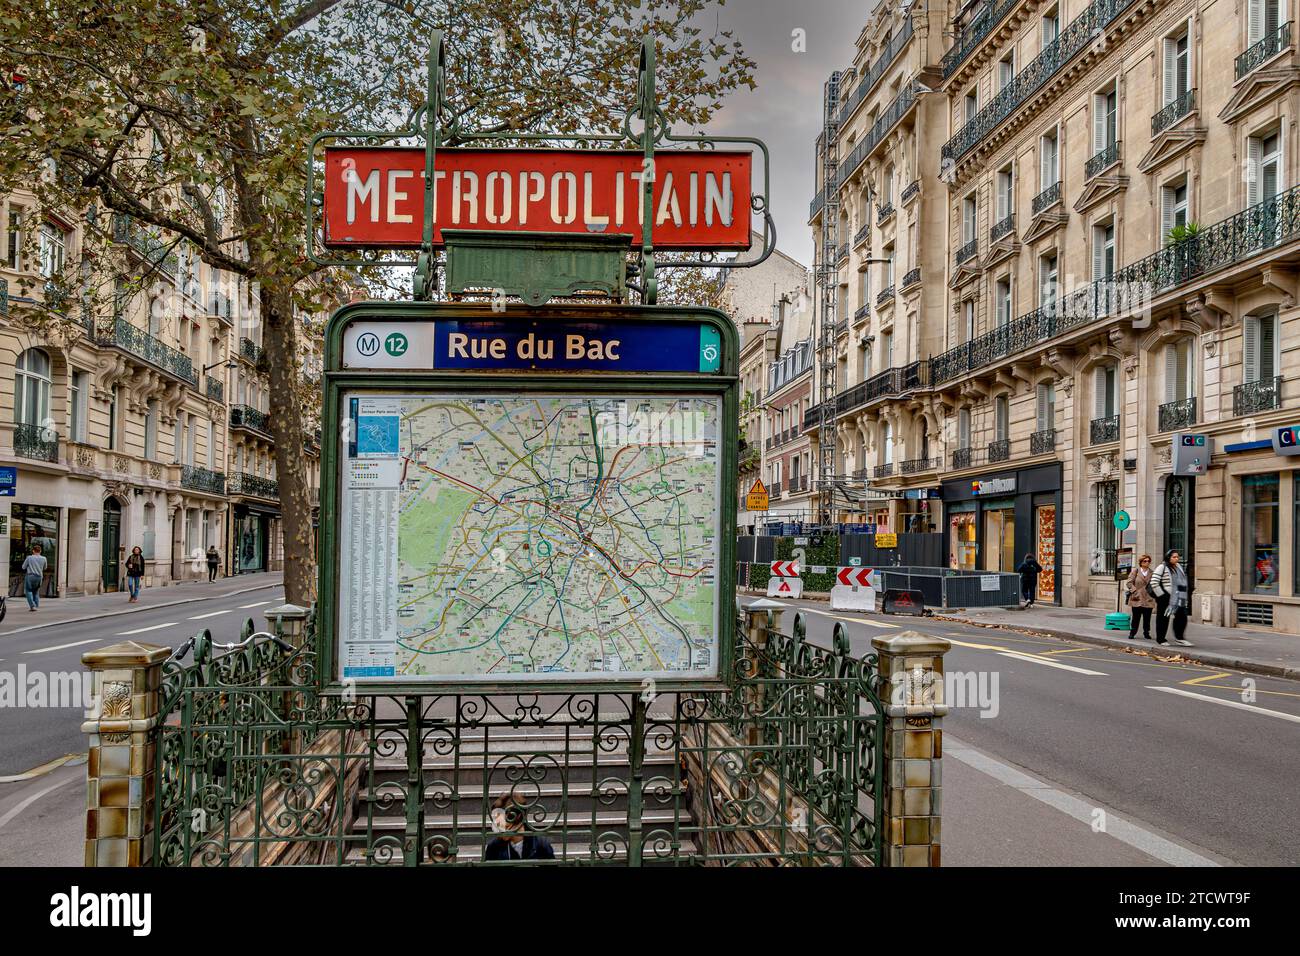 The entrance to Ru Du Bac Metro station on Boulevard Raspail in the 7th arrondissement of Paris, France Stock Photo